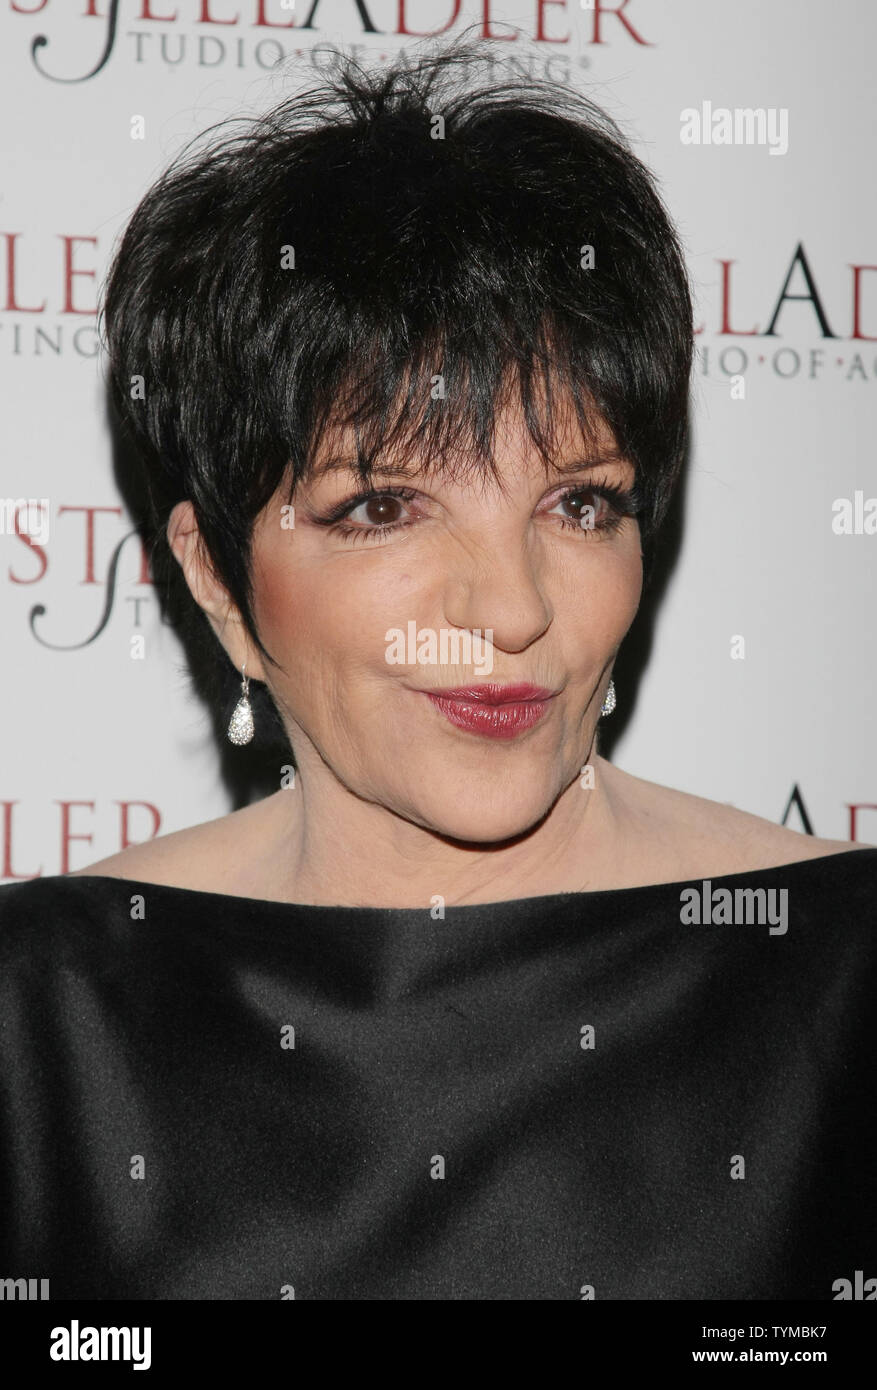 Liza Minelli arrives for the Stella Adler Studio's "Stella by Starlight"  gala held at the home of Denise Rich on May 2, 2011 in New York City. UPI  /Monika Graff Stock Photo - Alamy